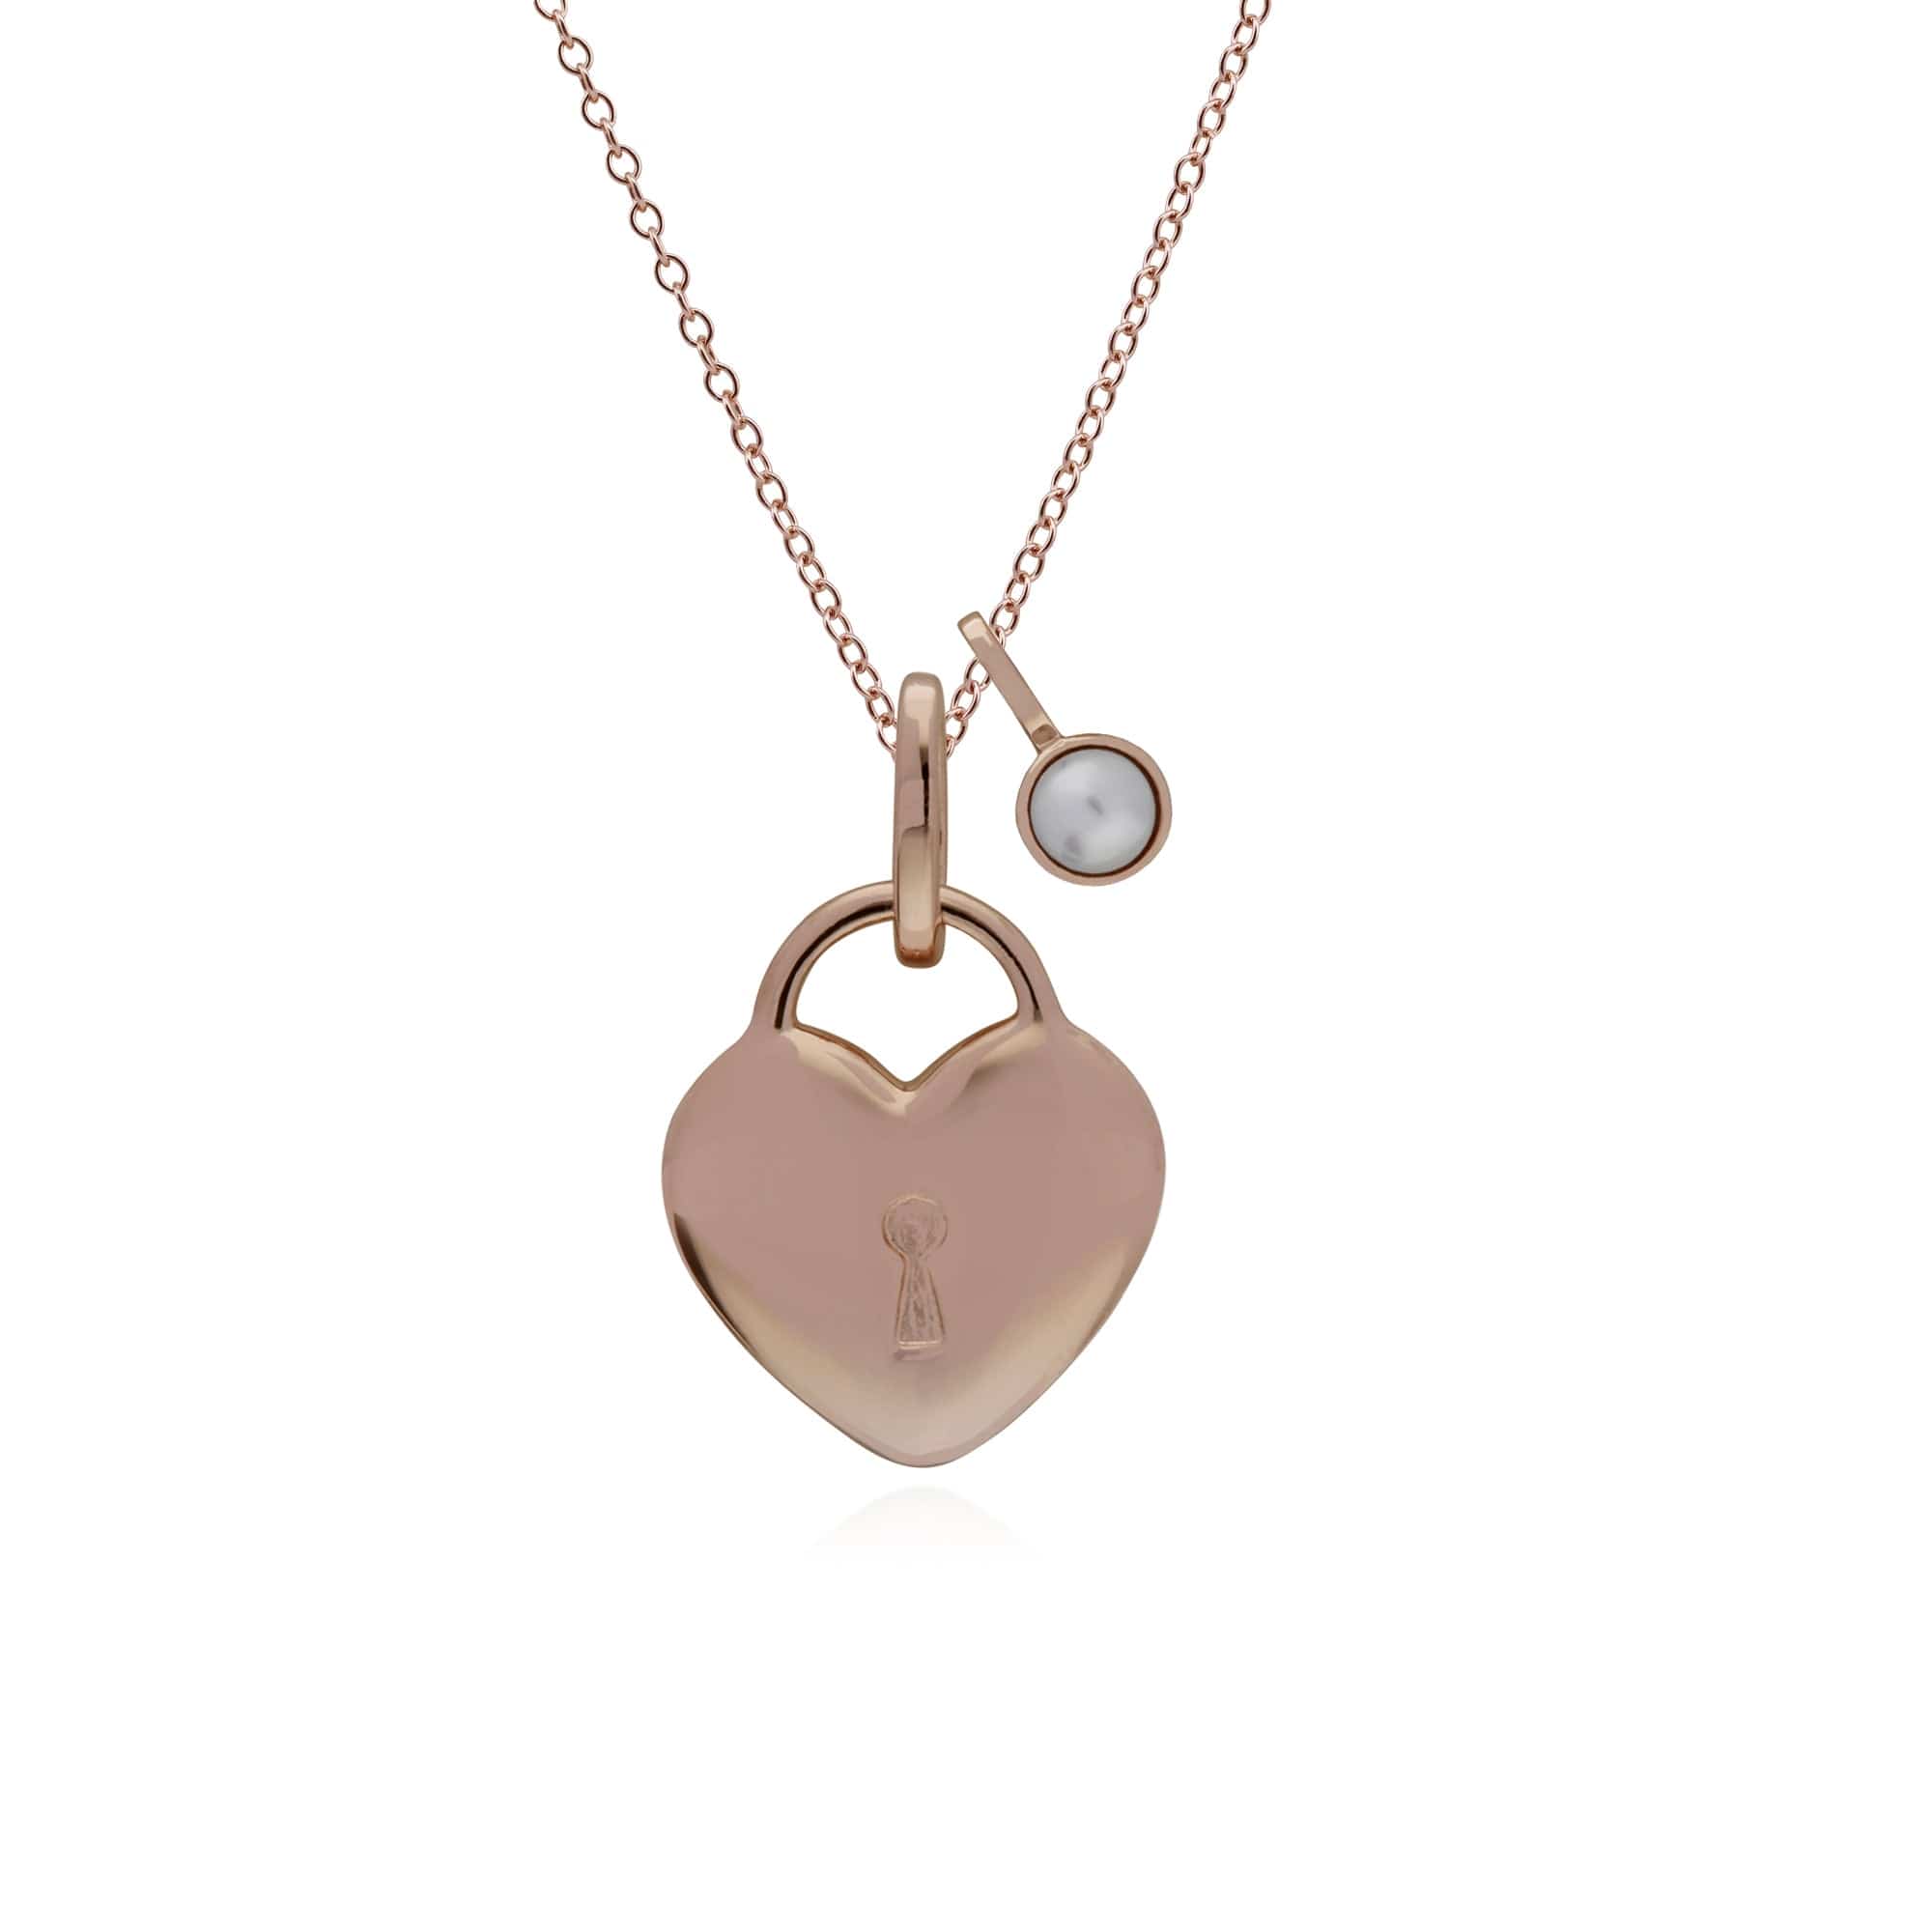 270P025701925-270P026901925 Classic Plain Heart Lock Pendant & Pearl Charm in Rose Gold Plated 925 Sterling Silver 1